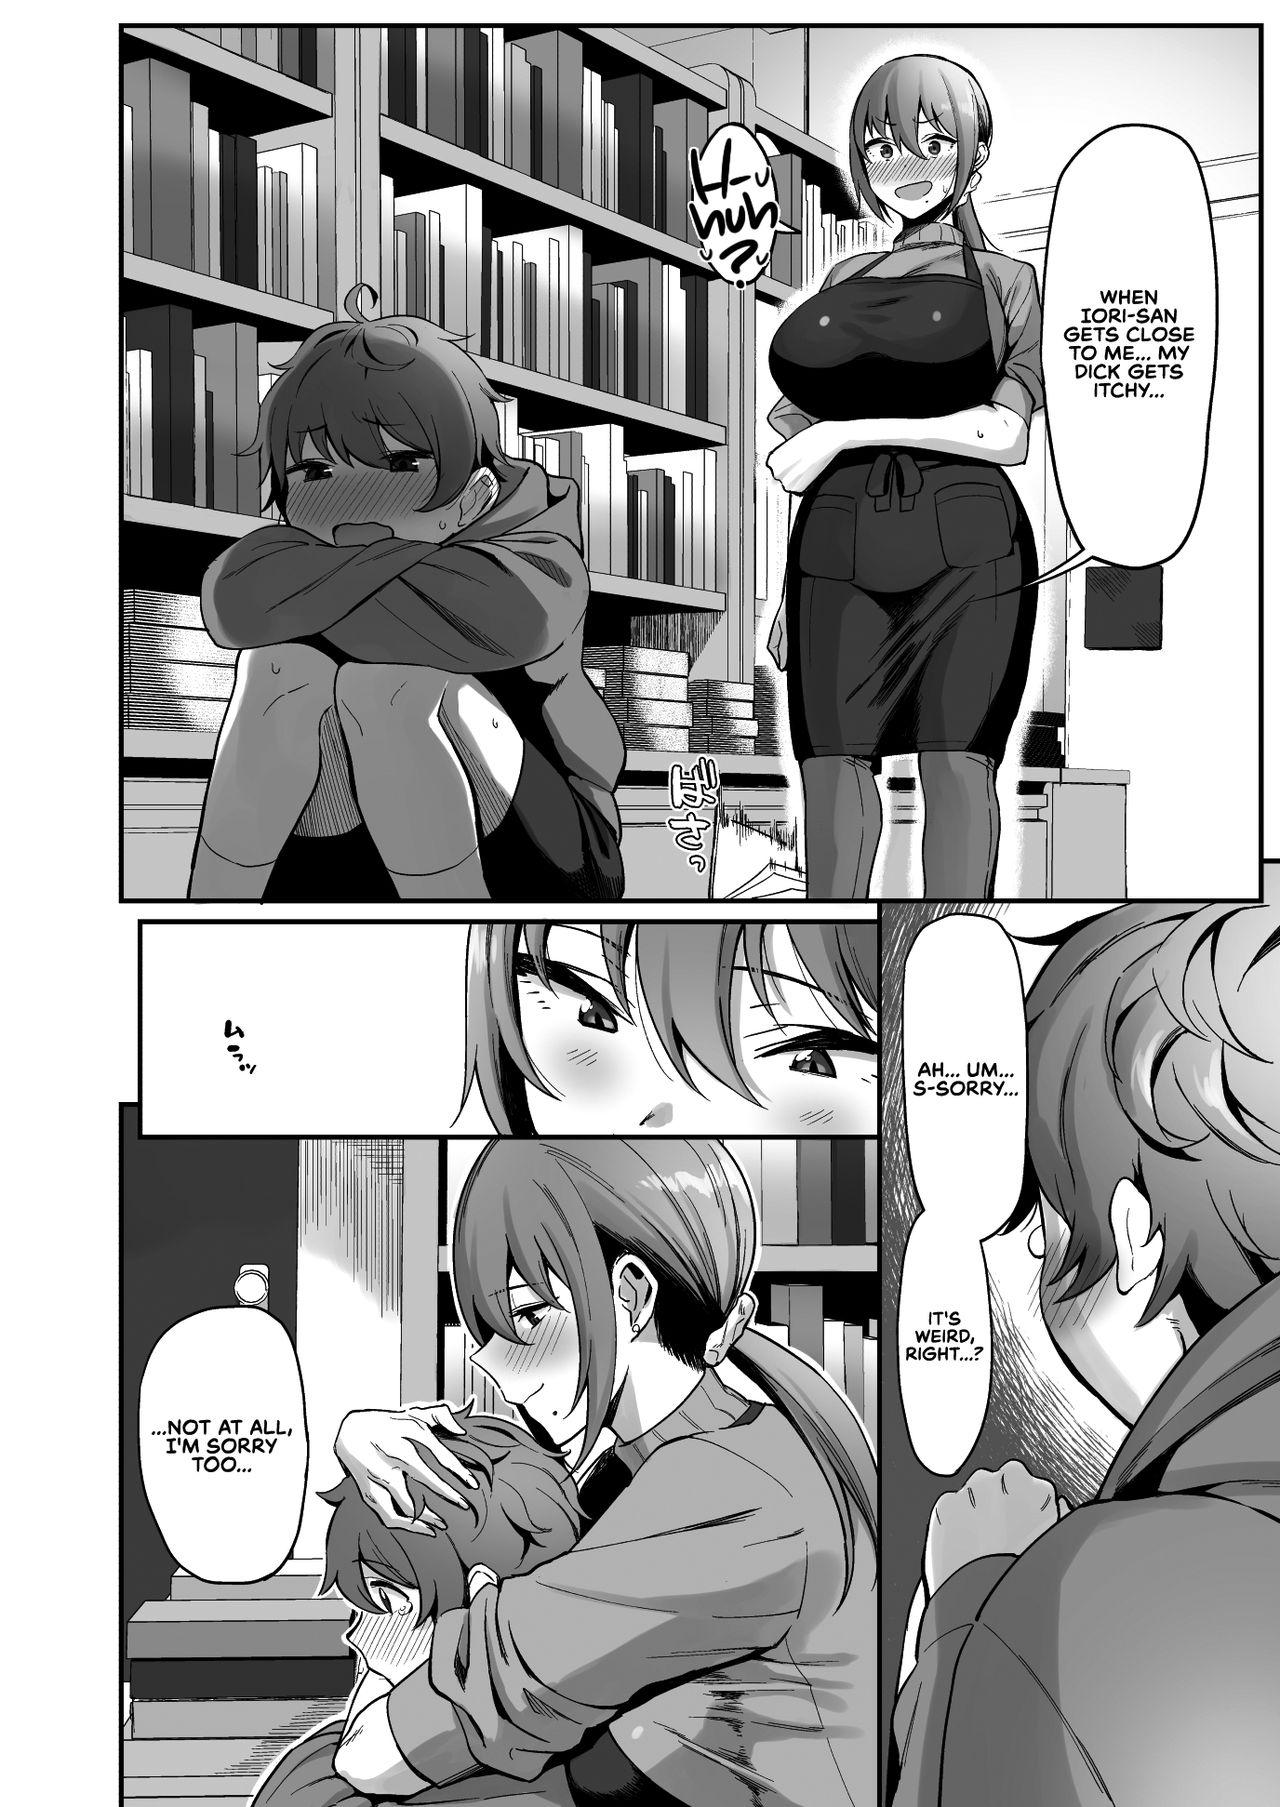 Periscope Furuhonya no Onee-san to | With The Lady From The Used Book Shop - Original Hardfuck - Page 9